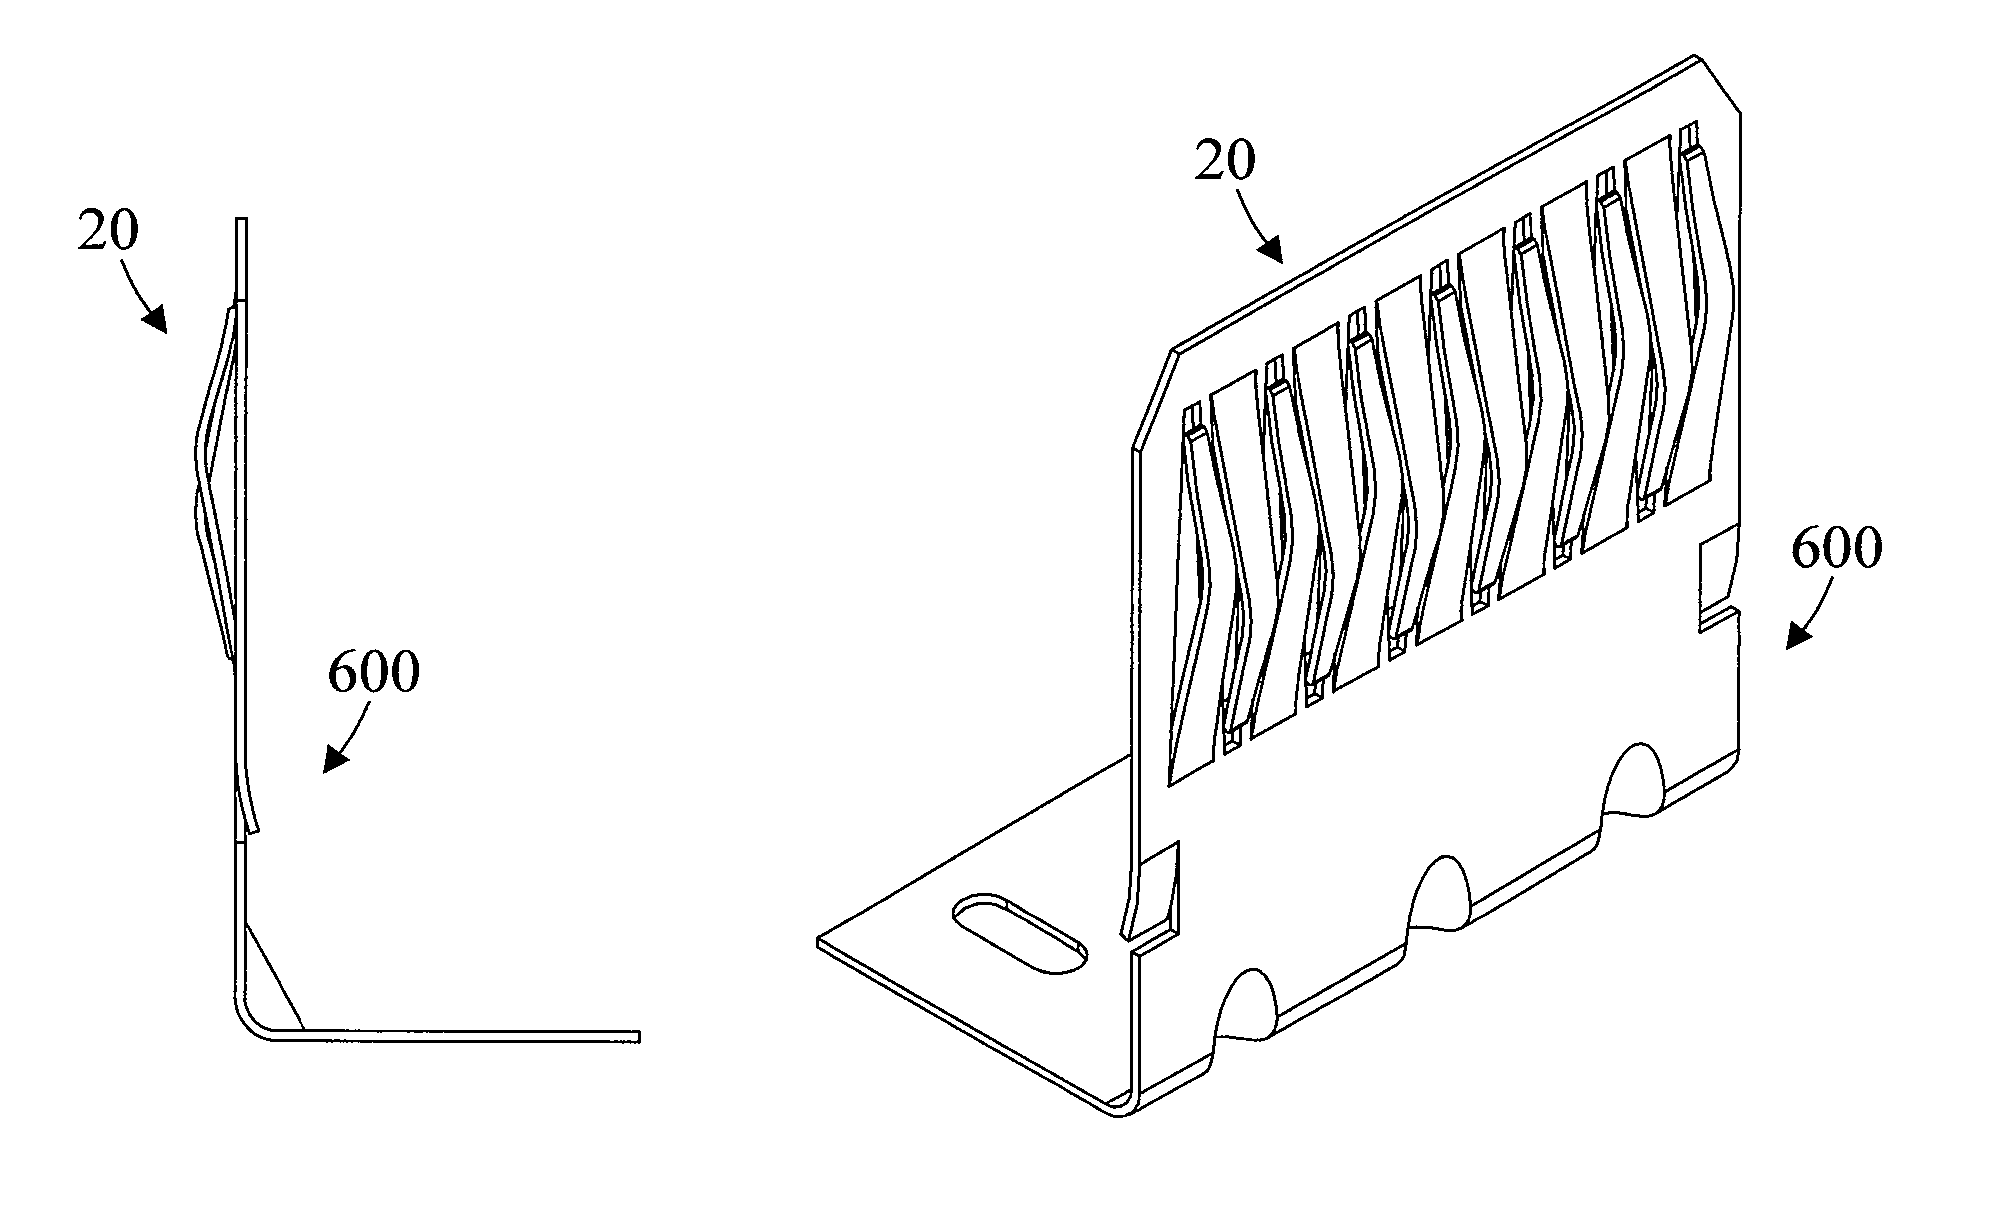 Electrical contact having multiple cantilevered beams